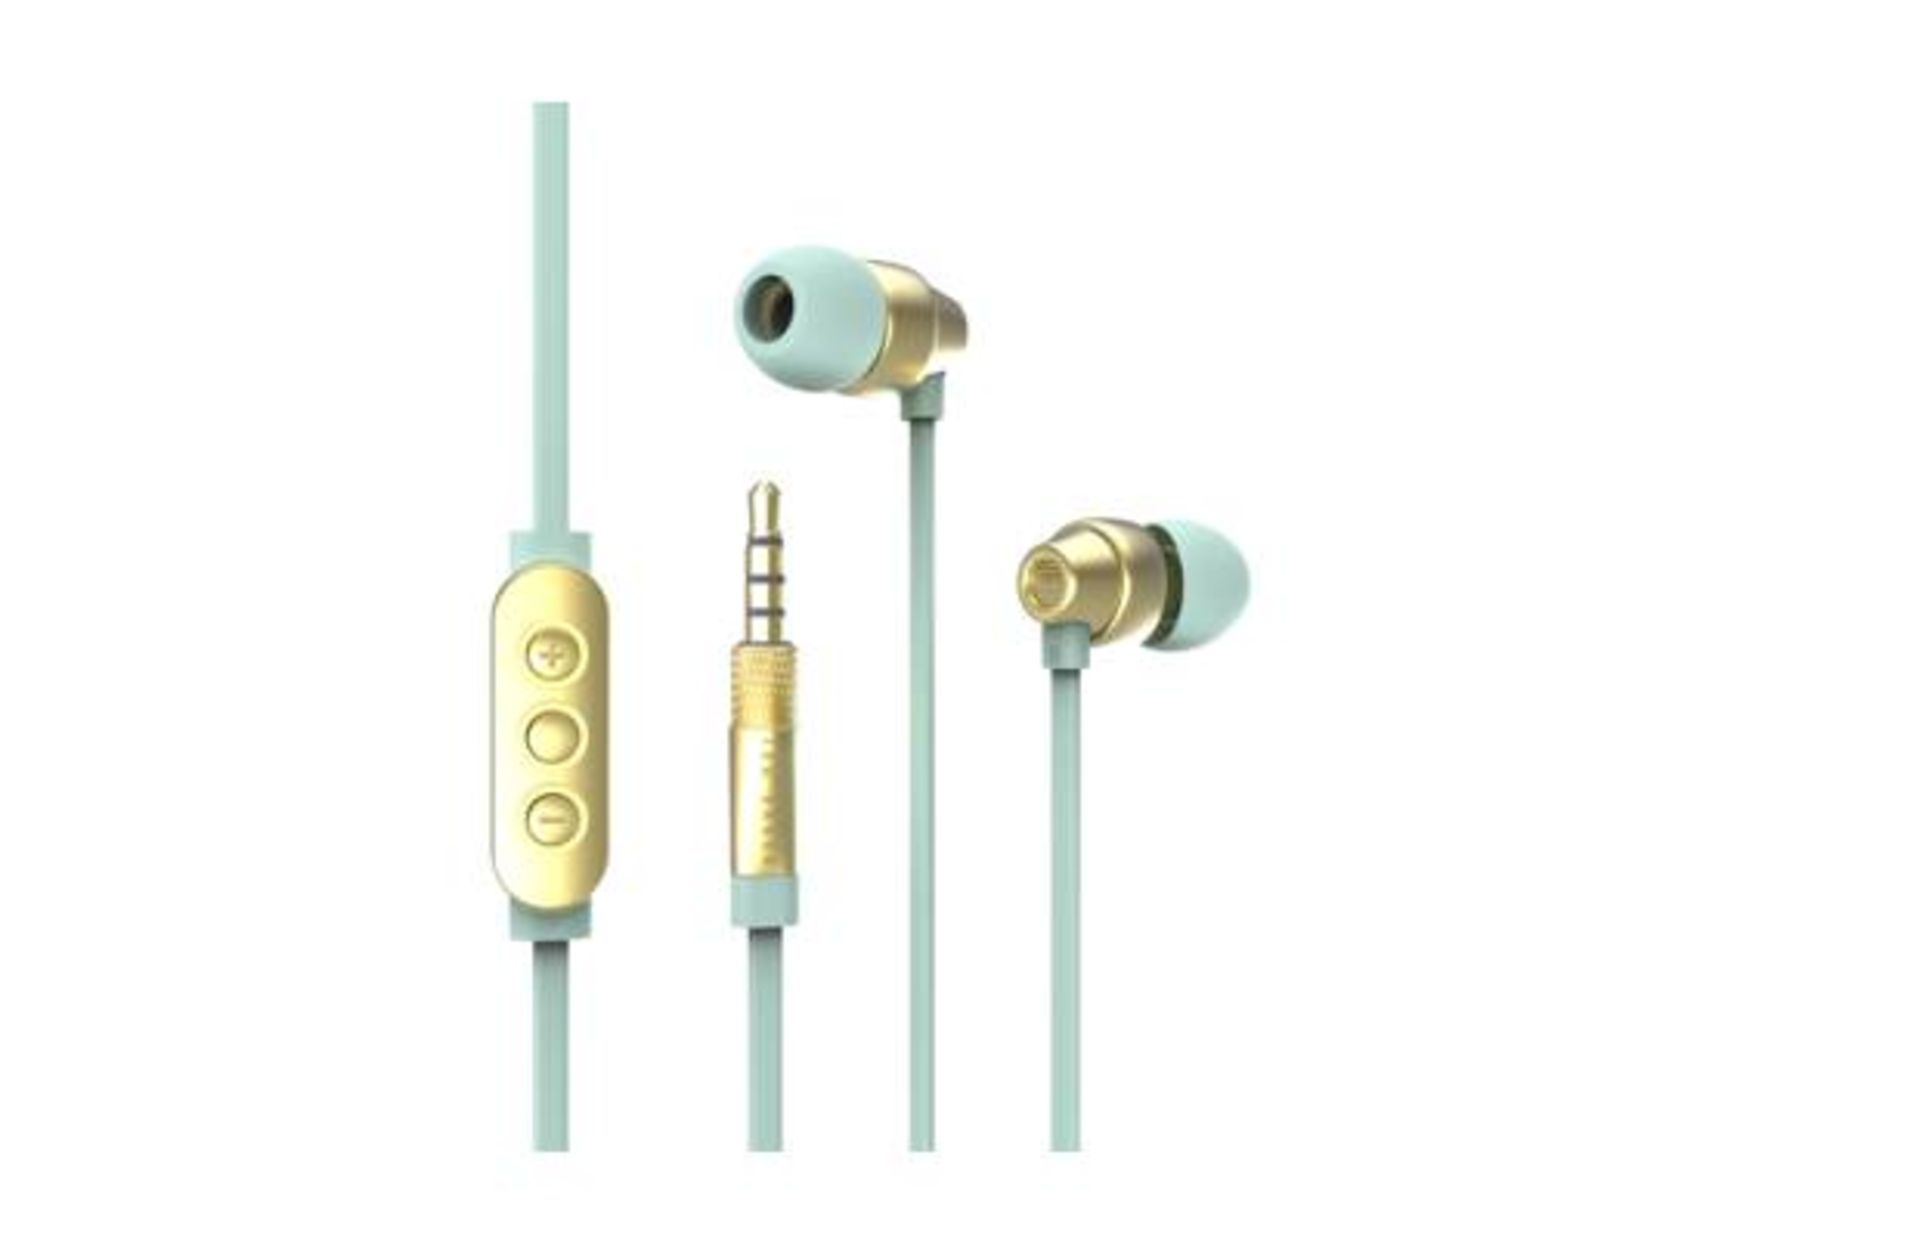 V *TRADE QTY* Brand New Ted Baker Dover In-Ear Headphones In Mint/Gold RRP£59.95 eBay£39.99 X 10